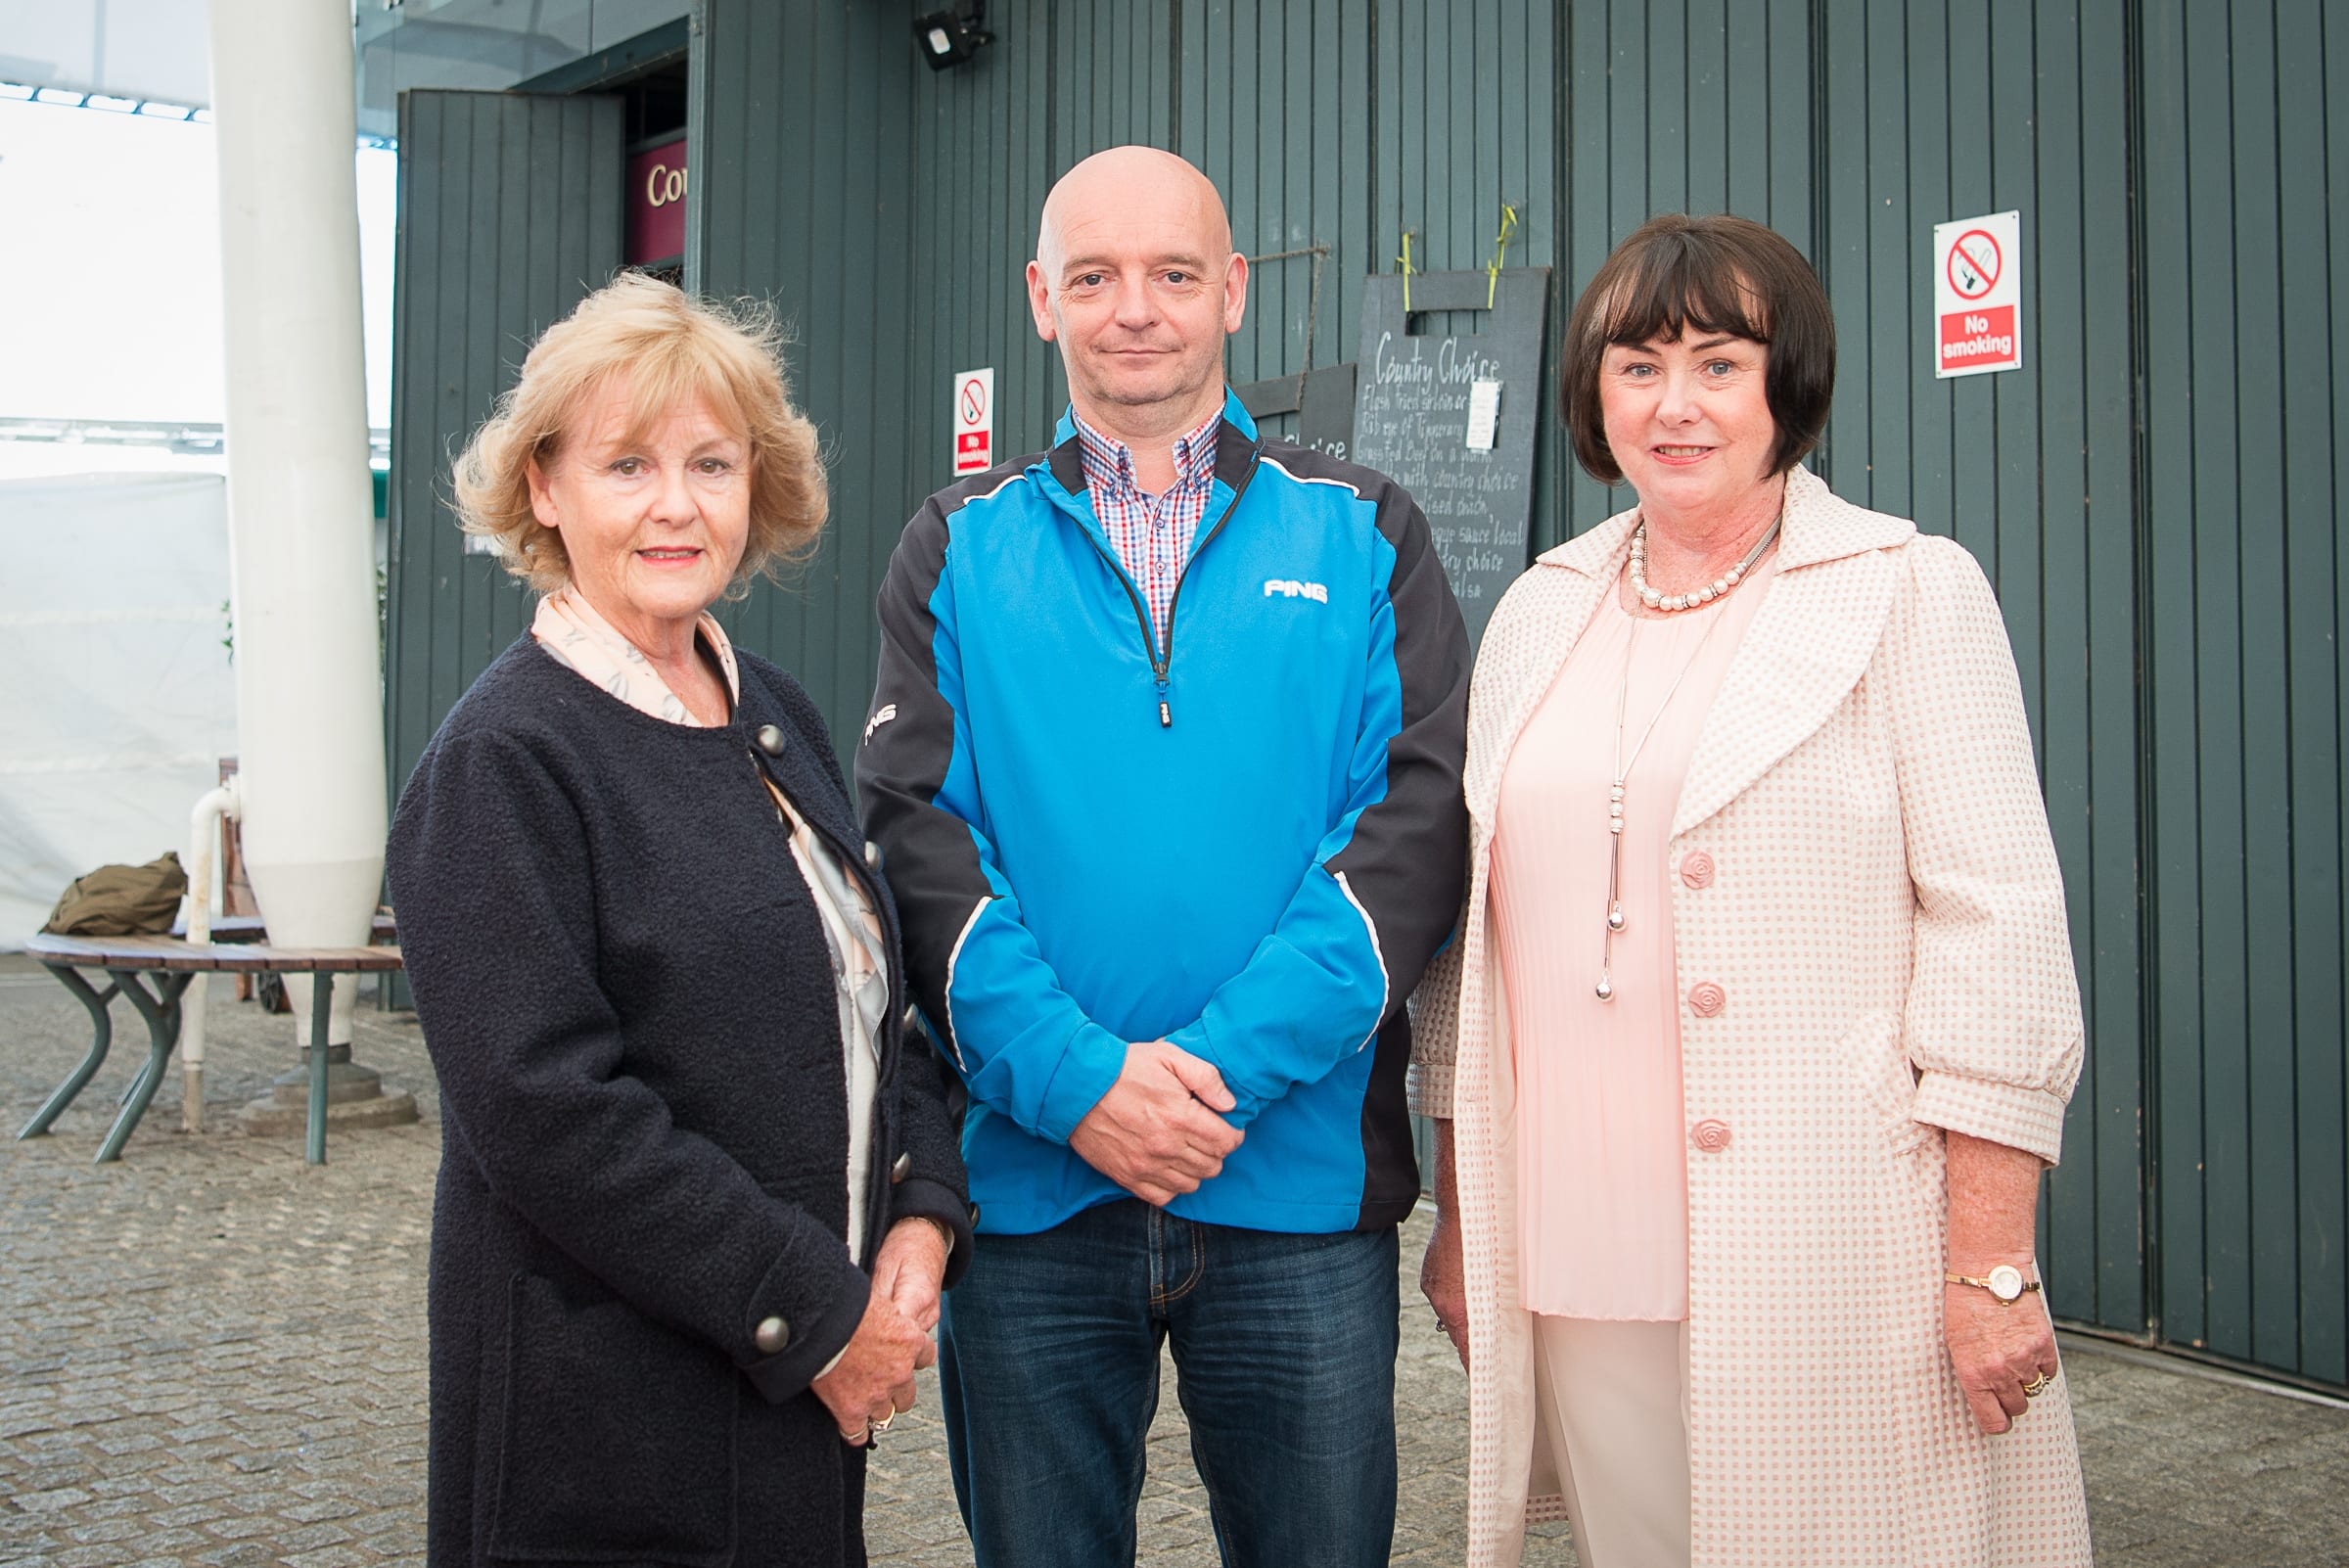 From Left to Right:  Regional Leaders BBQ which took place on the 6th June in the Limerick Milk Market:  Mary Larkin - Director / Limerick and  District Credit Union, Fergus Chawke - Employmum, Caroline Long - CEO/  - Limerick and  District Credit Union,
Photo by Morning Star Photography